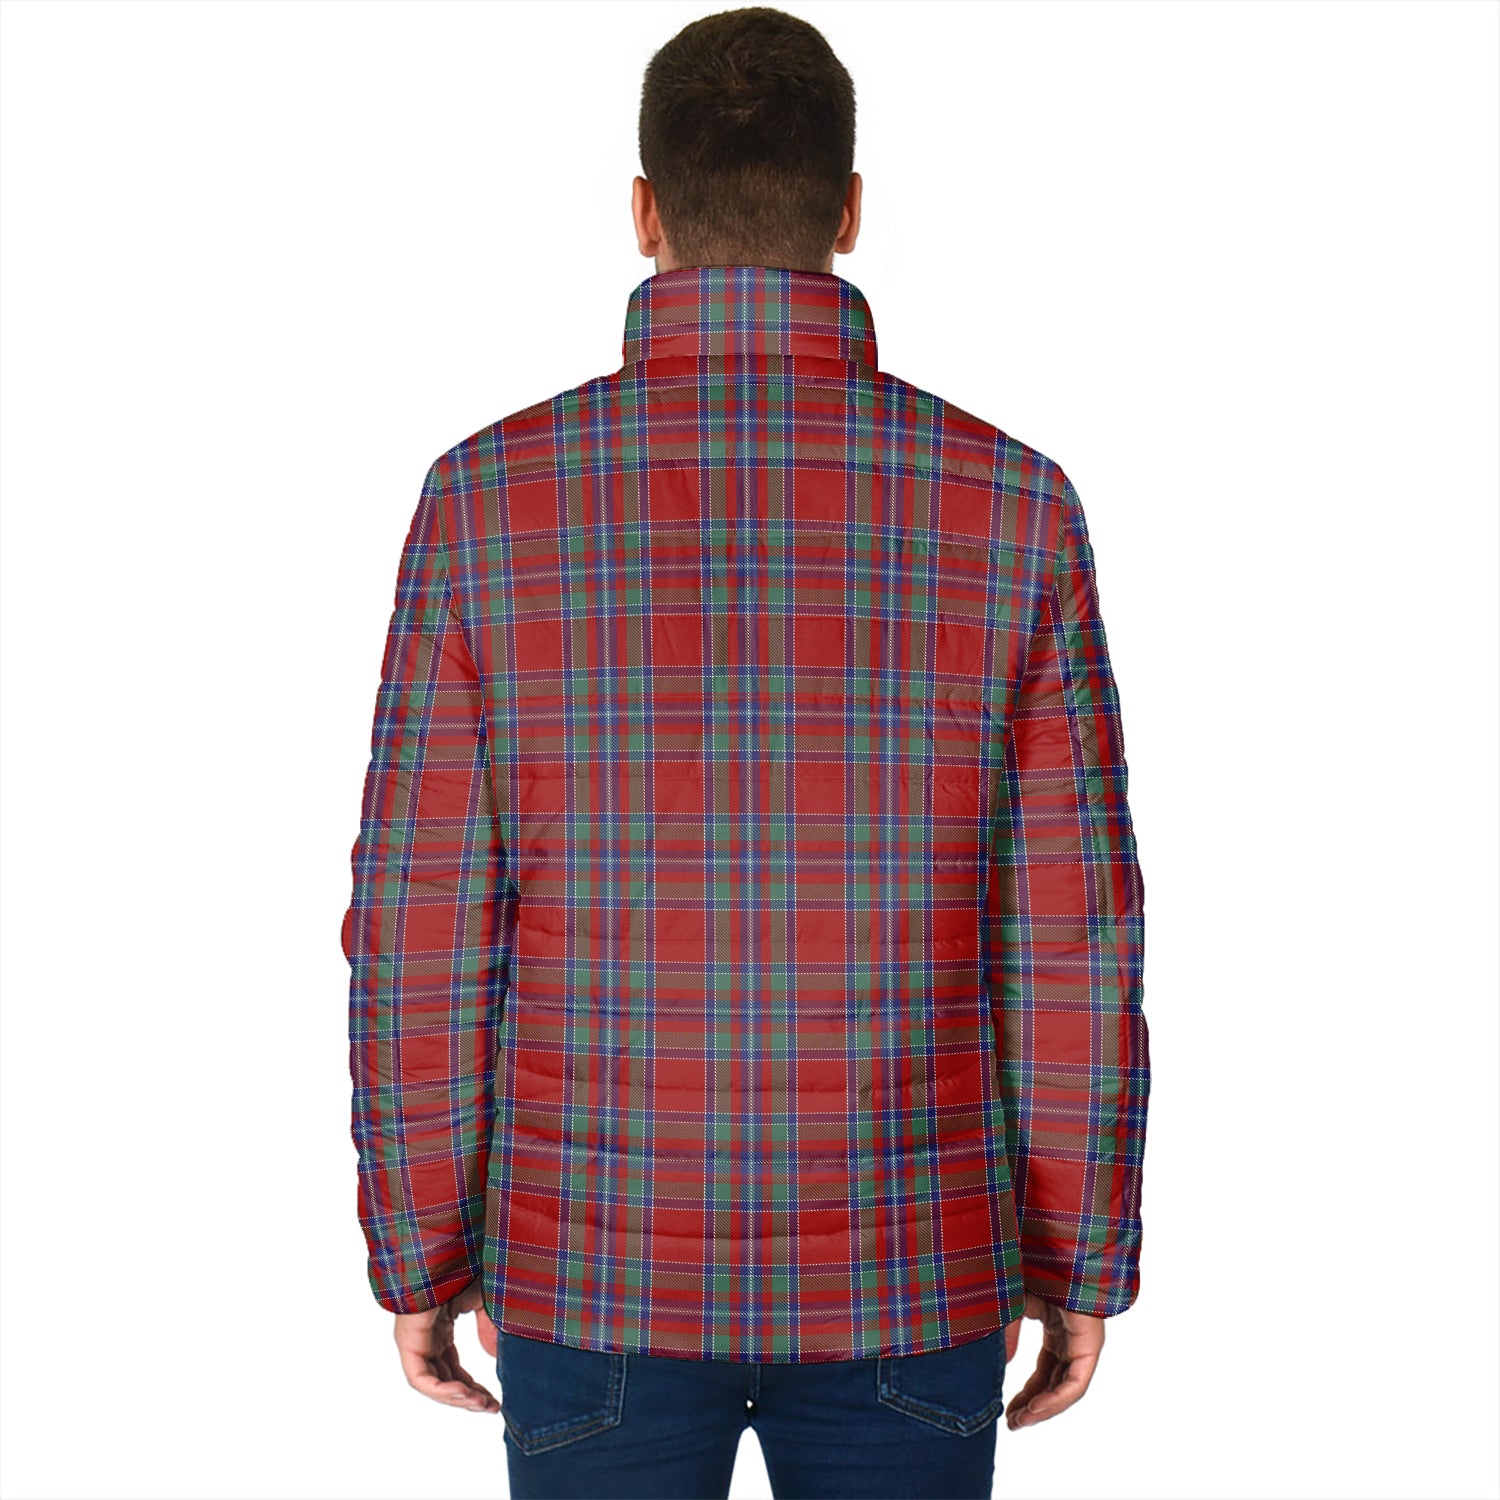 spens-tartan-padded-jacket-with-family-crest